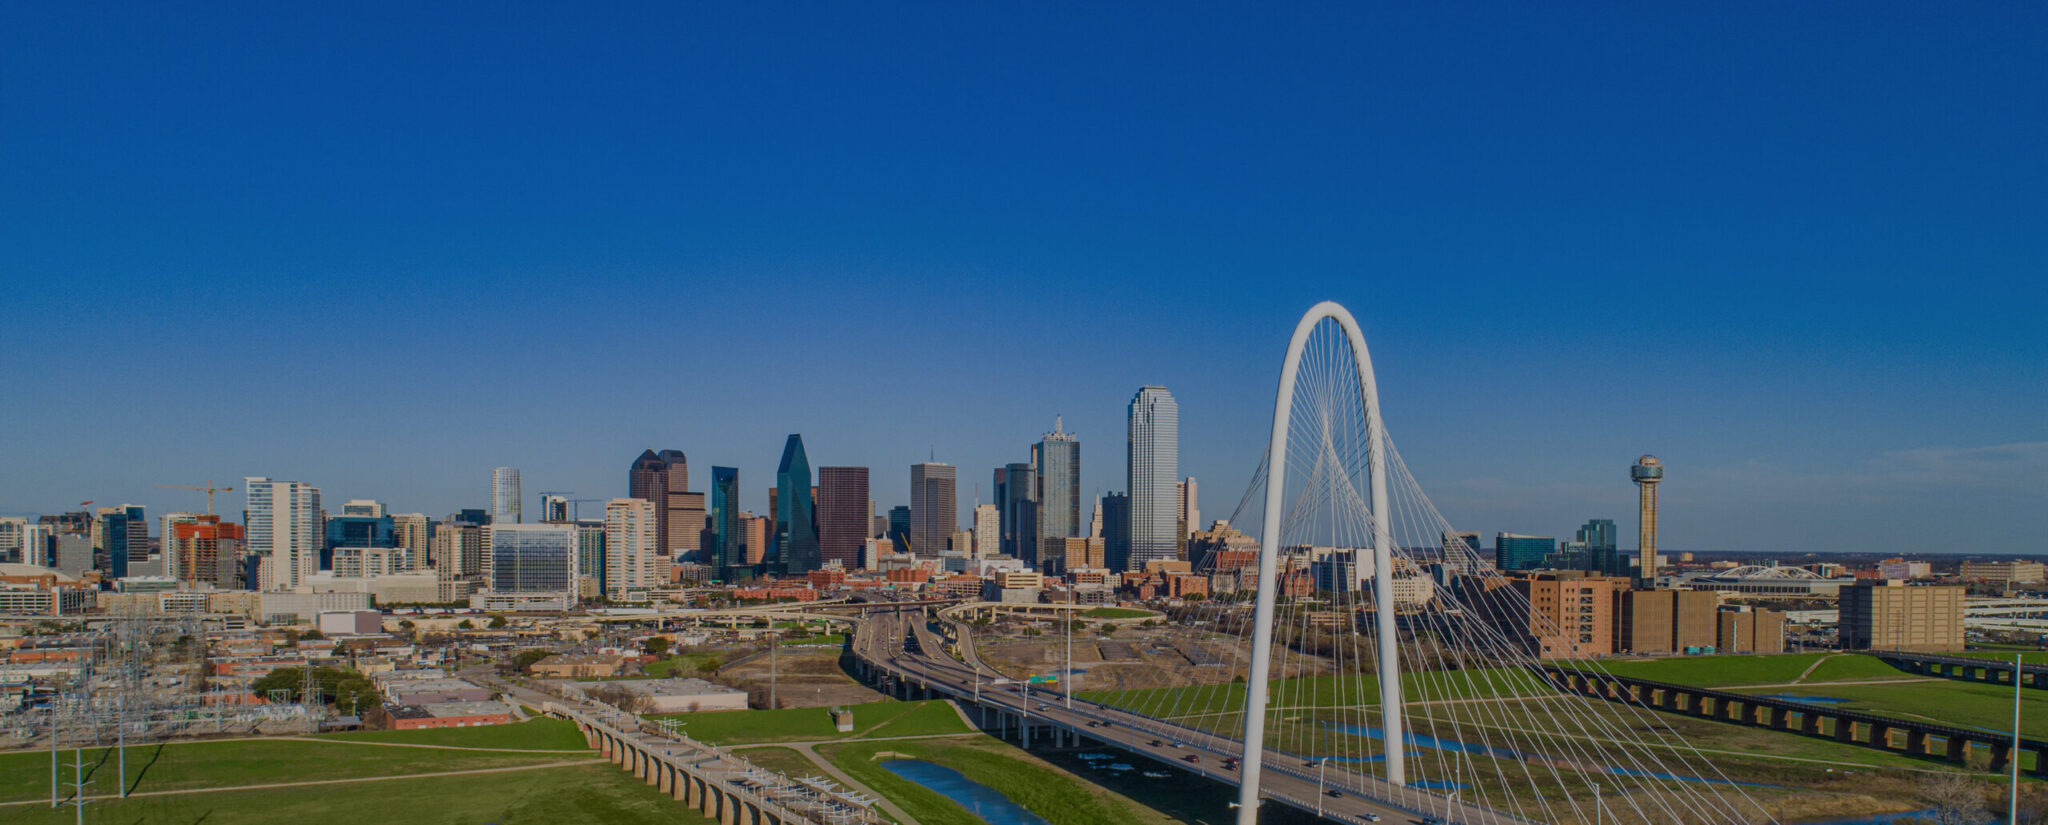 Personal Injury Law Firm in Dallas, TX